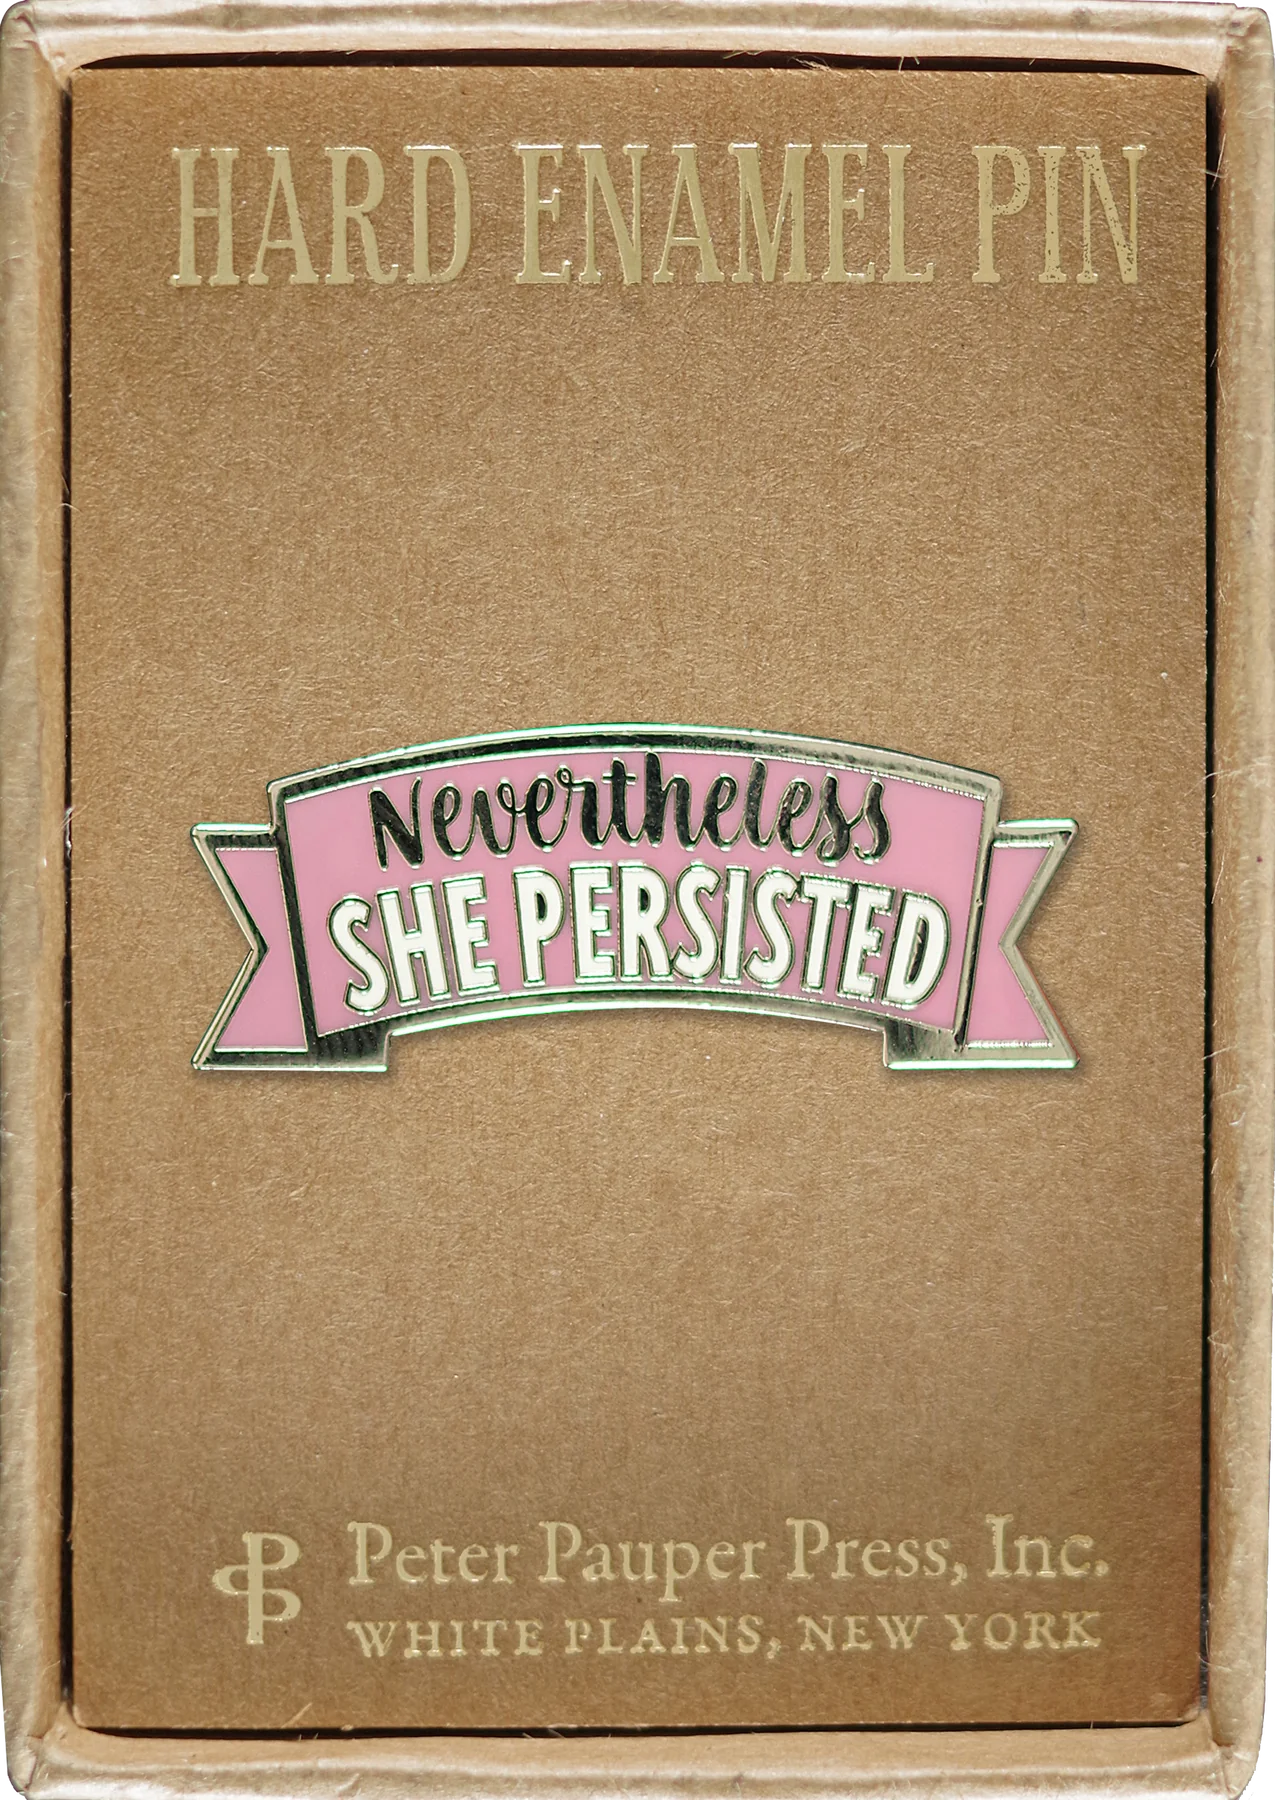 pink banner with green order and green/white text that reads "nevertheless she persisted" attached to a box that says hard enamel pin